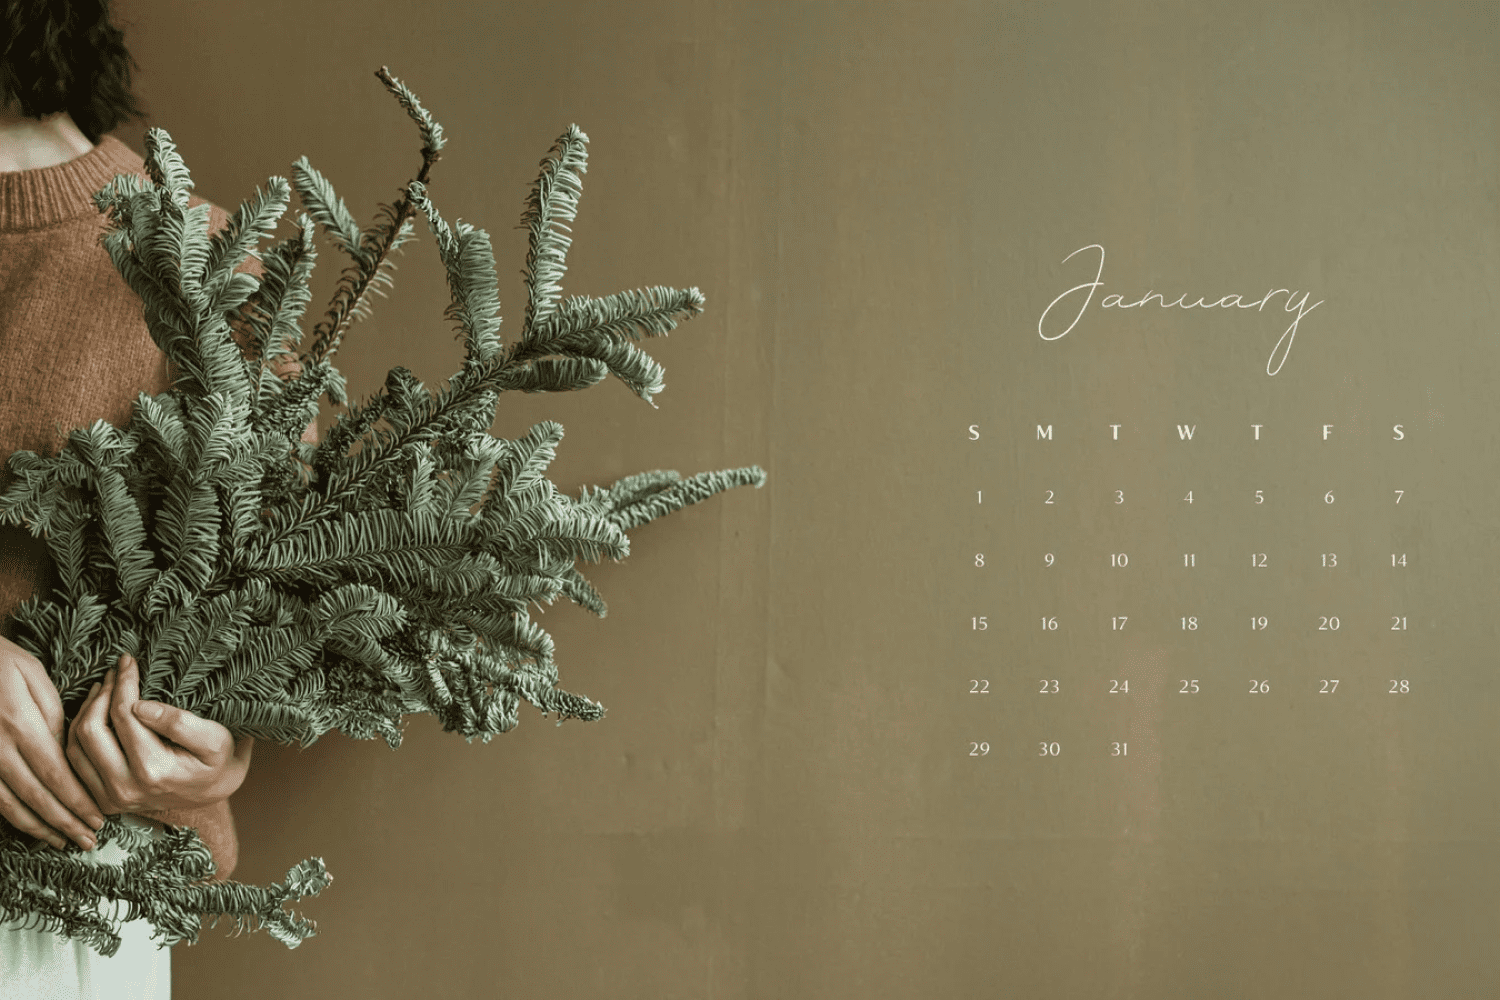 Calendar for january with a photo of a girl holding a bunch of fir branches.